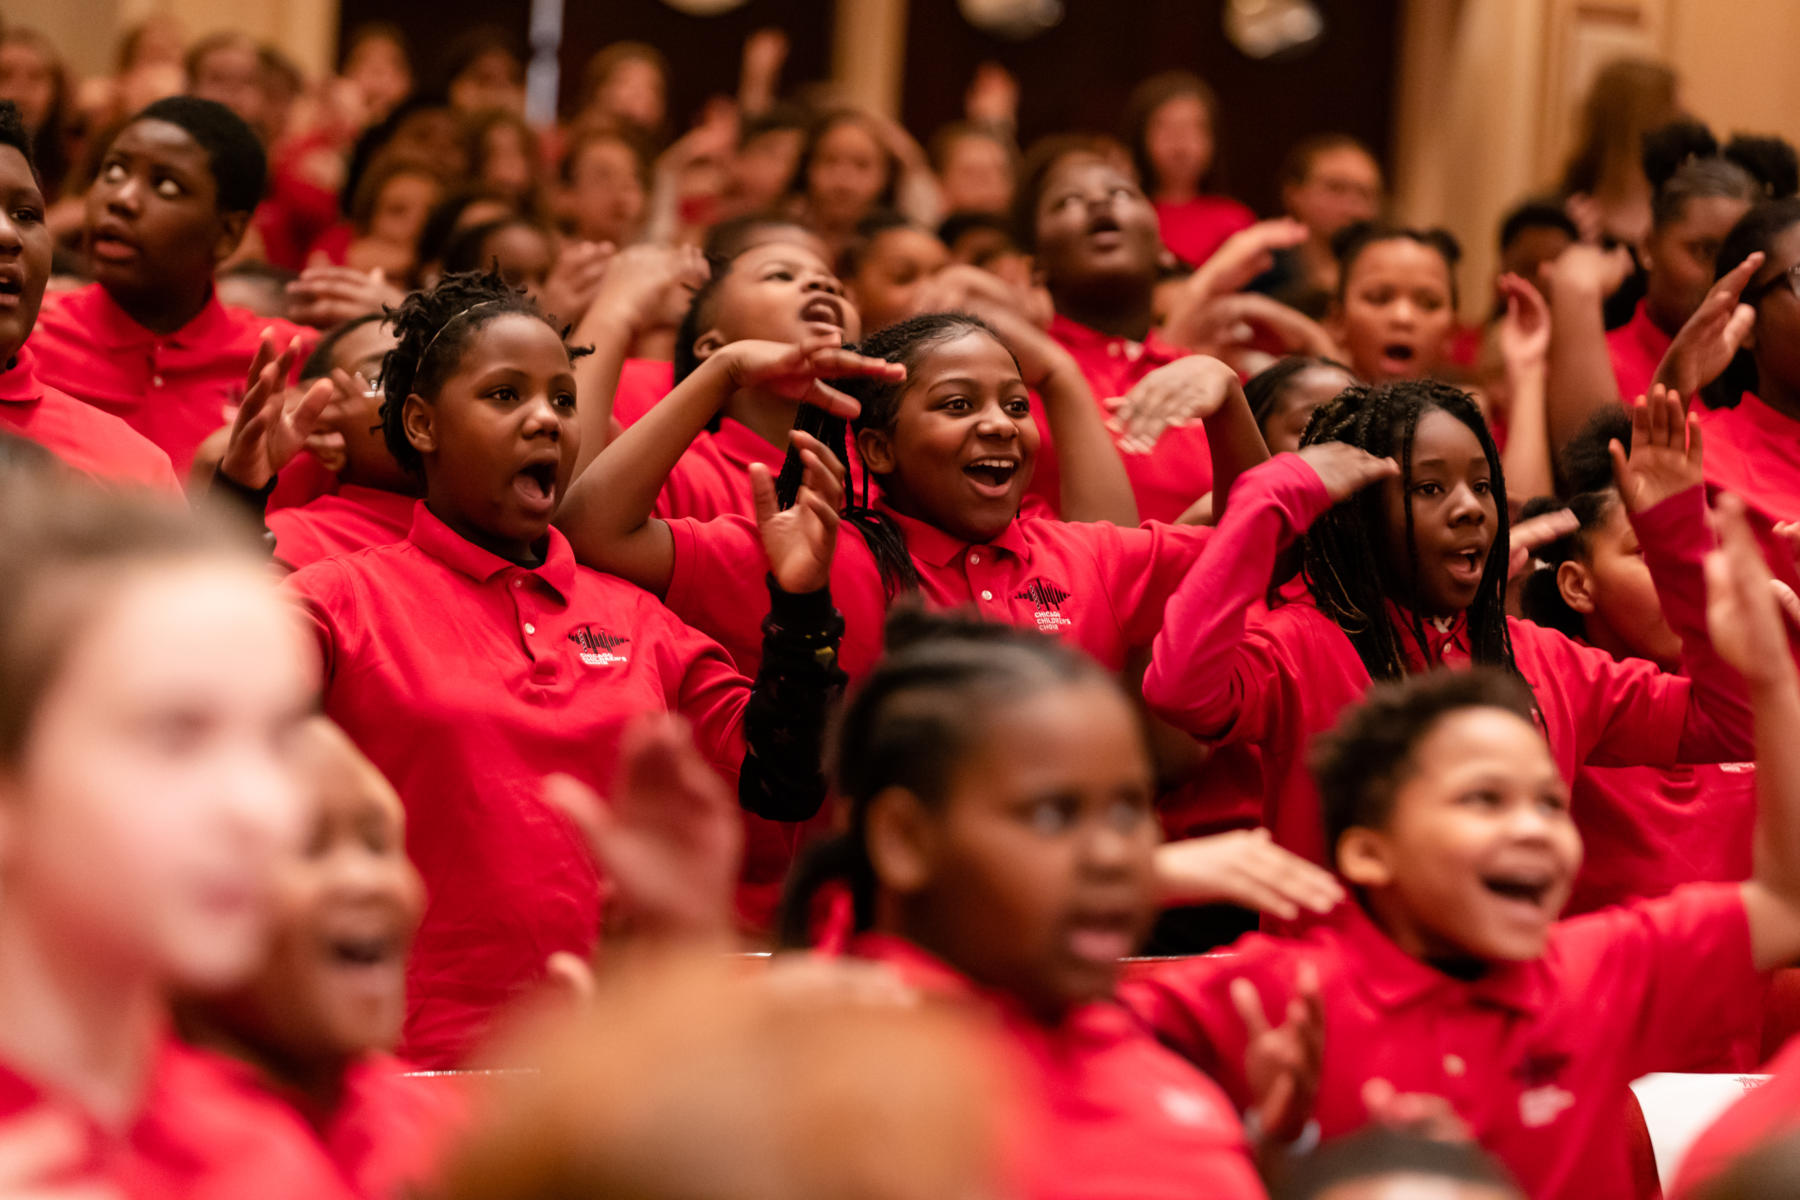 5_Chicago Children’s Choir performance for Black History Month 2020_photo by Kyle Flubacker